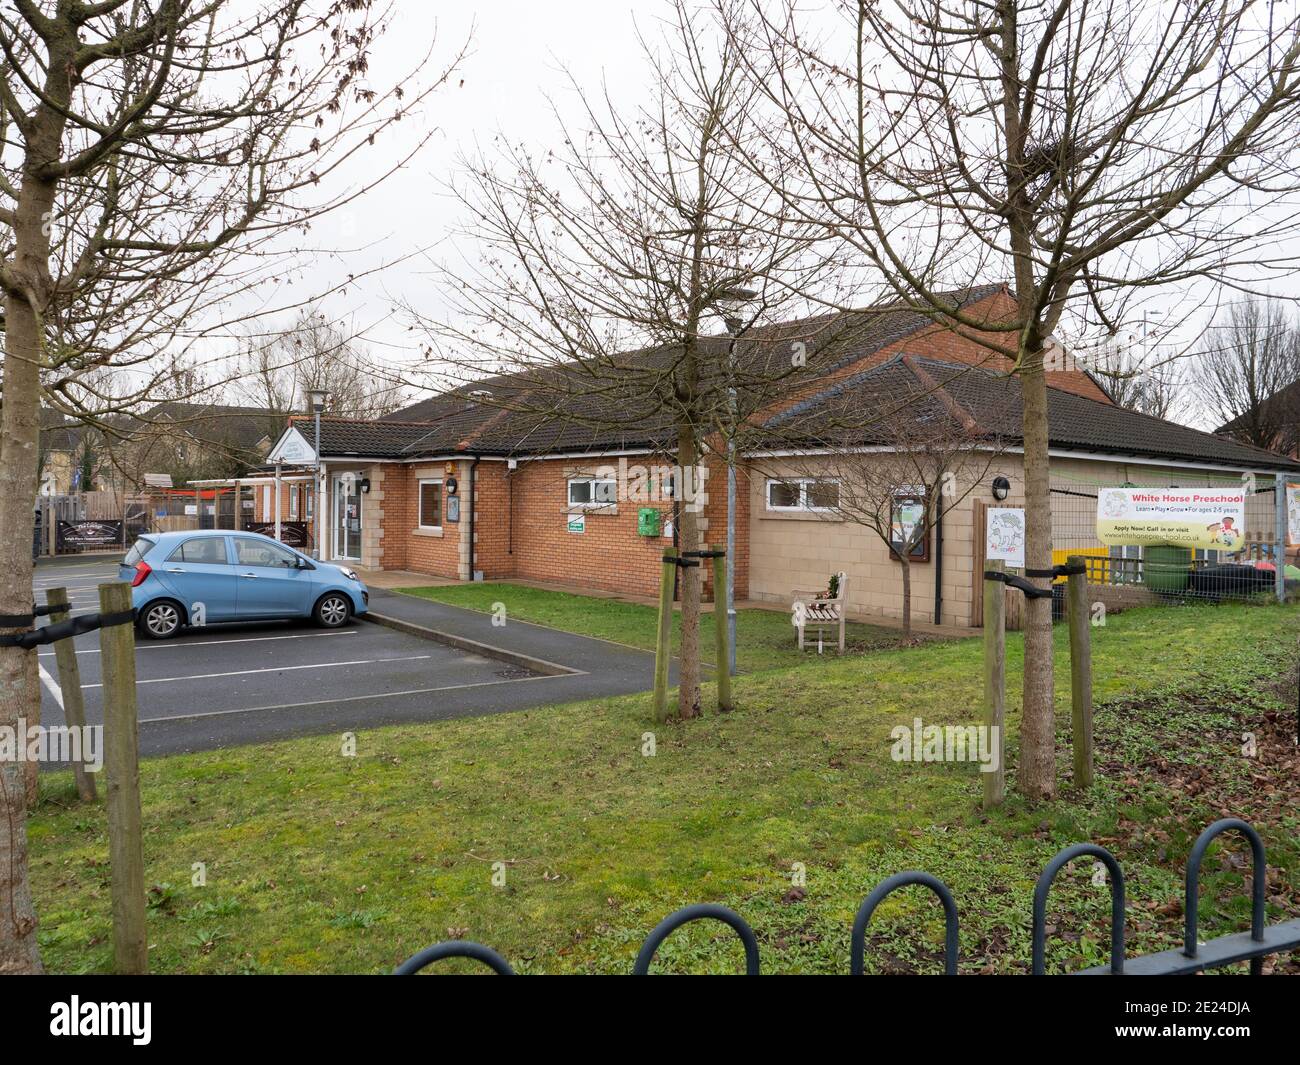 Leigh Park Community Centre on a very dull day near Westbury, Wiltshire, England, UK. Stock Photo